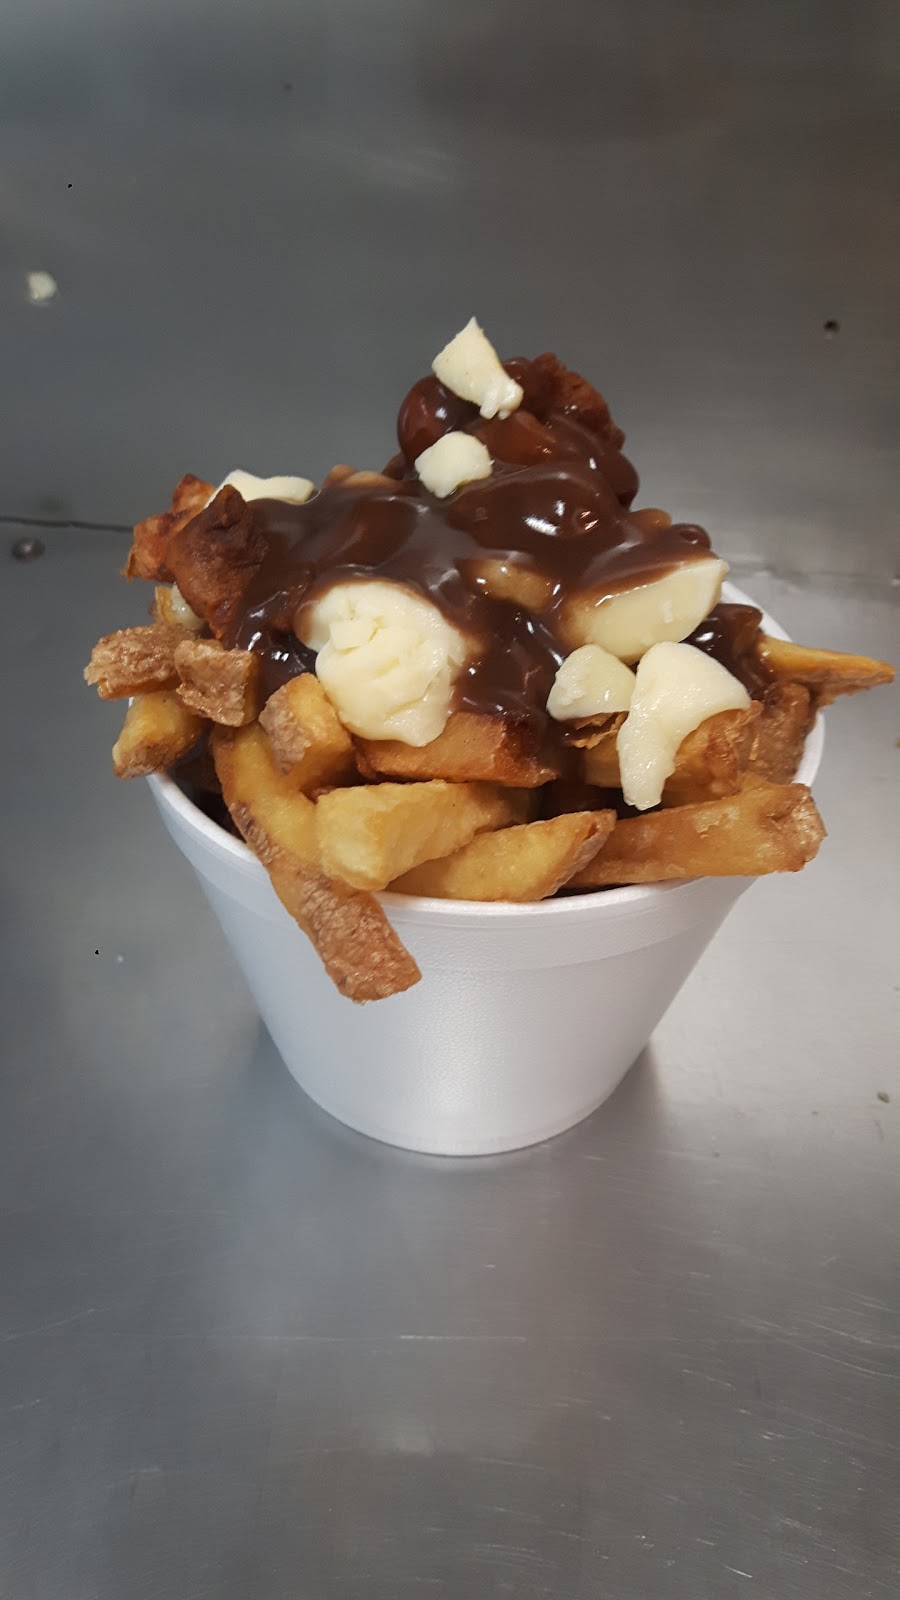 The Fry Guy | Horseshoe Valley Rd W, Anten Mills, ON L0L 1Y0, Canada | Phone: (705) 726-5207